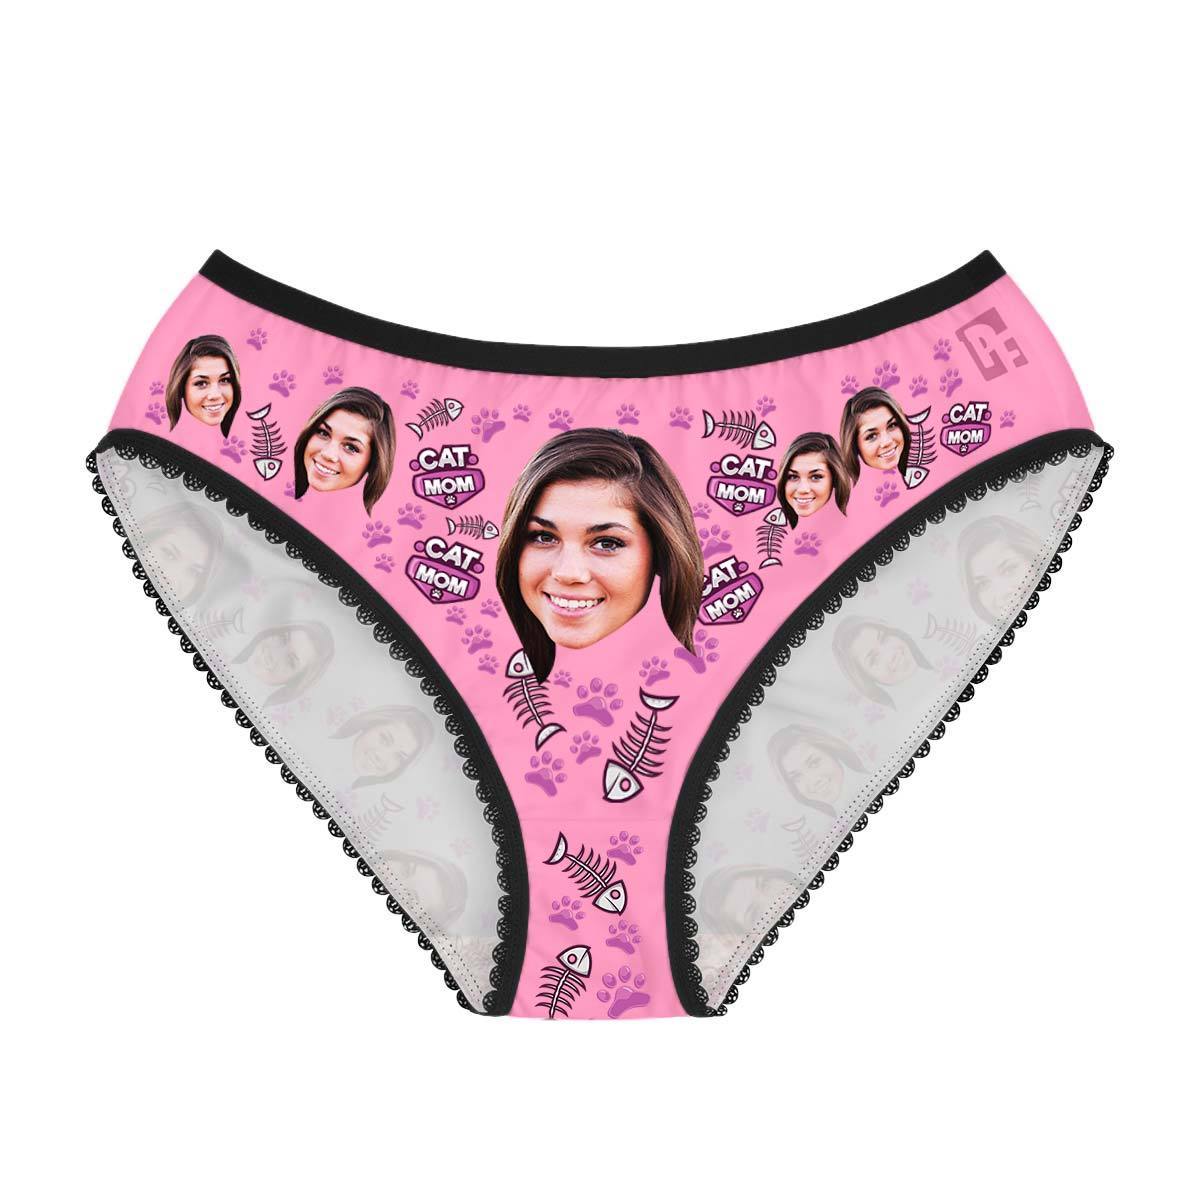 Pink Cat Mom women's underwear briefs personalized with photo printed on them